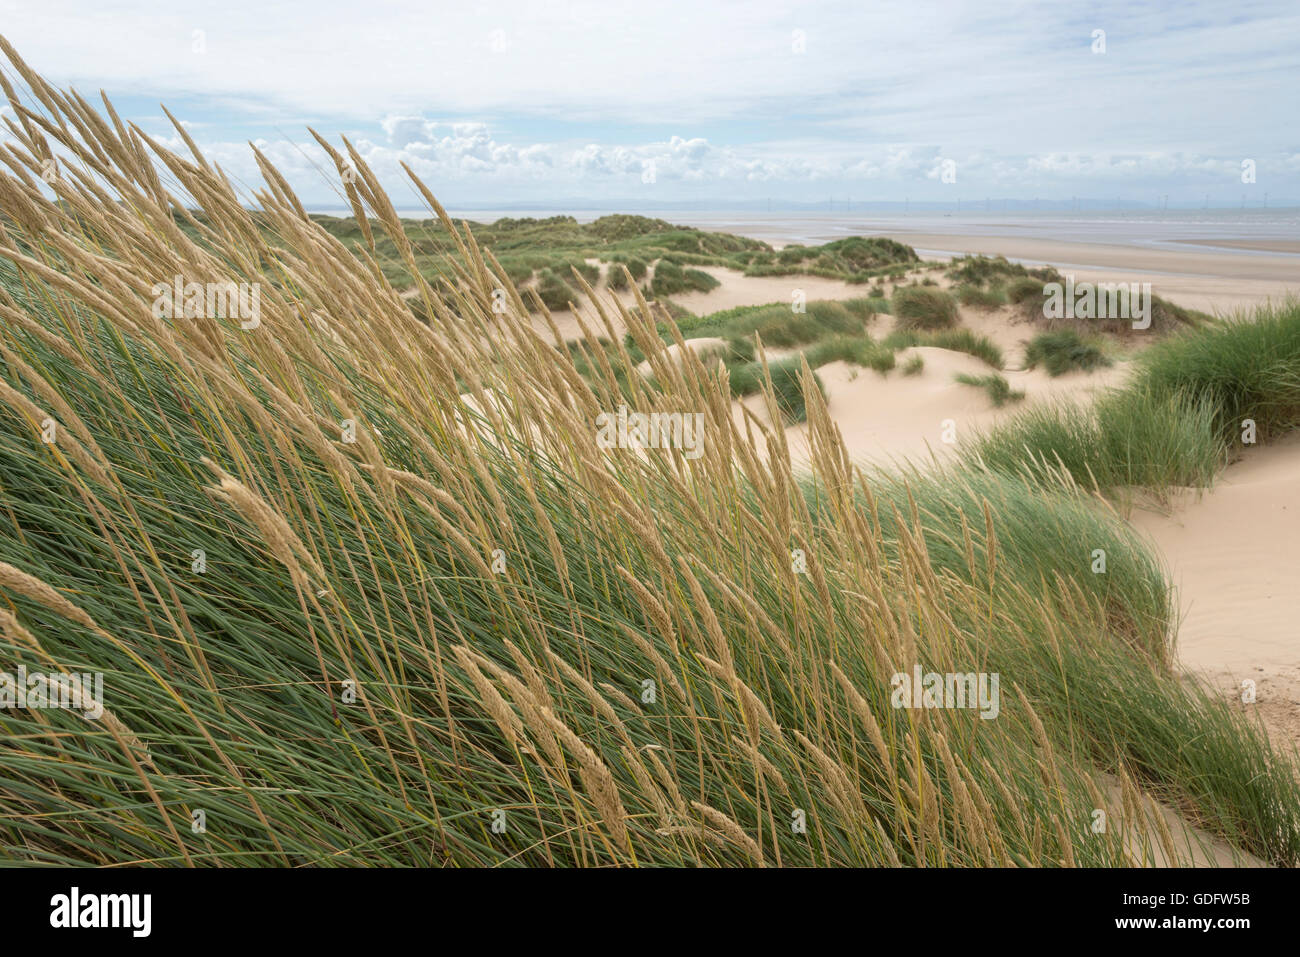 Marram grasses on the dunes at Formby point on the coast of Merseyside, Northwest England. Stock Photo